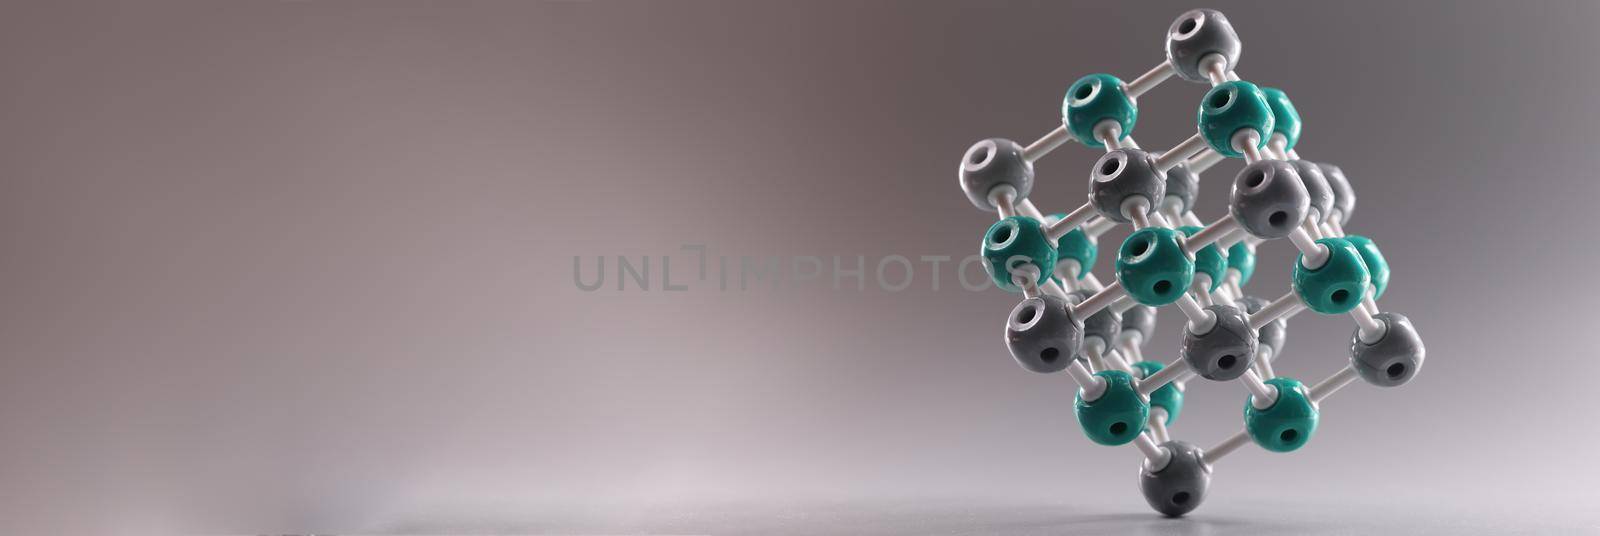 Plastic molecule in shape of square on gray background by kuprevich